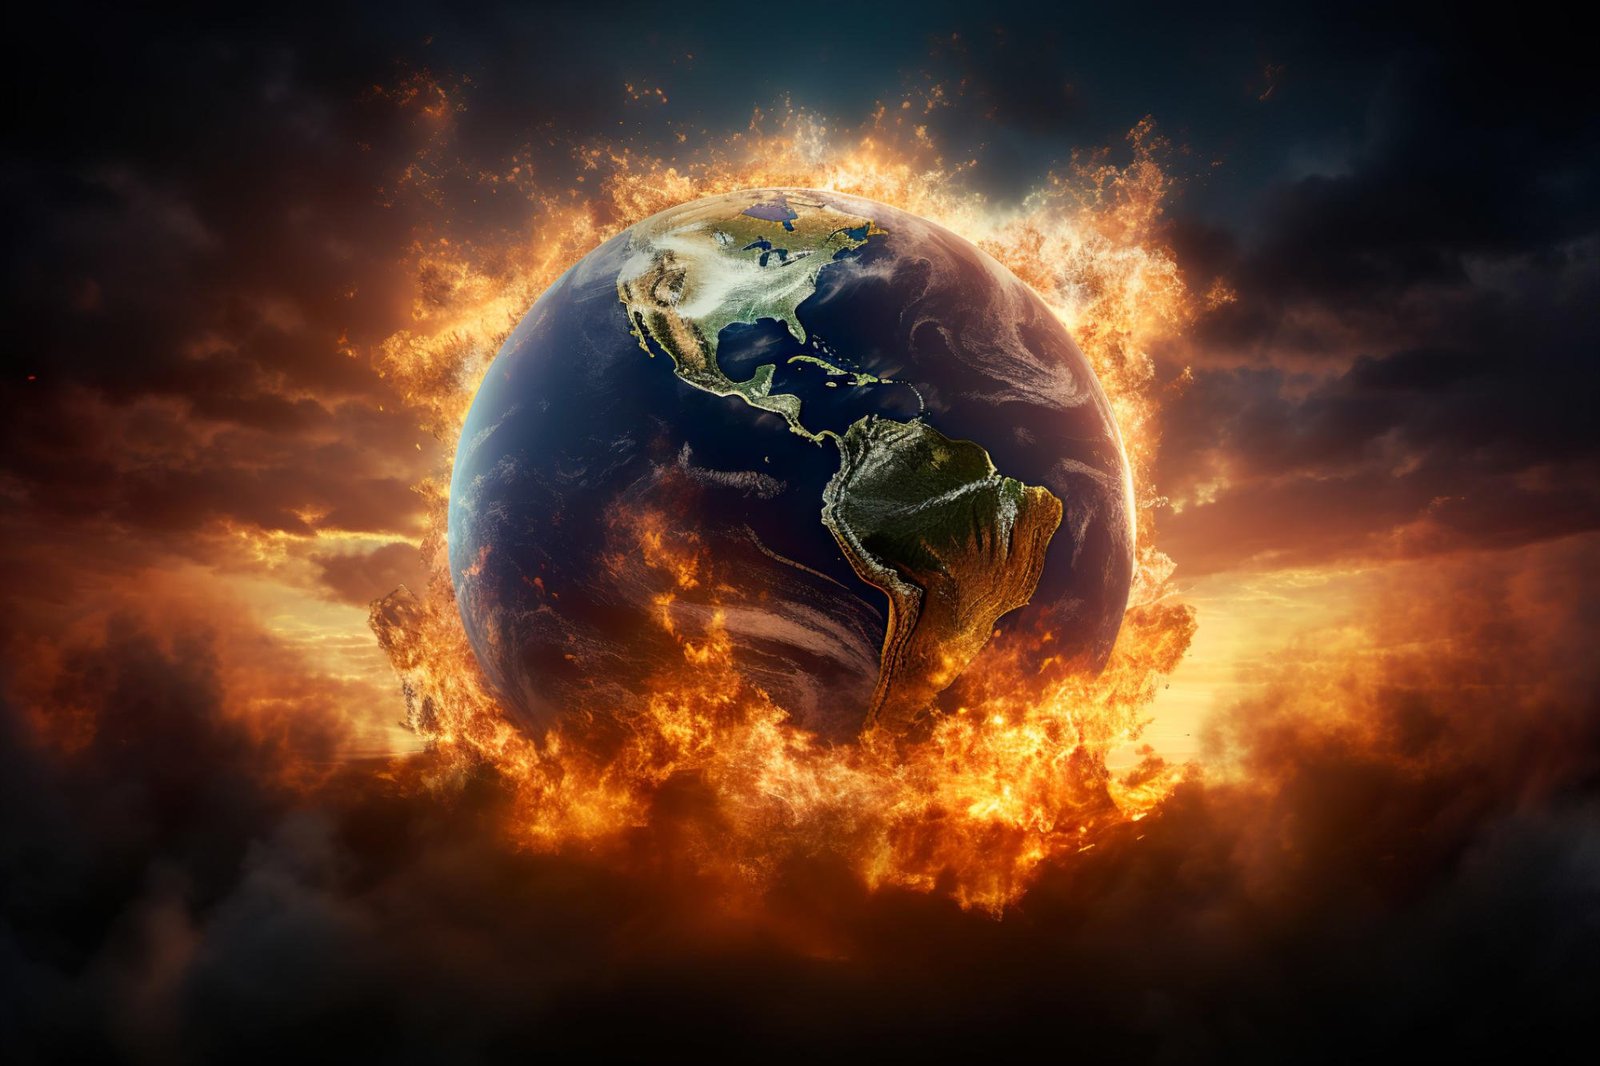 Shockingly Little Research on Major Threats to Earth